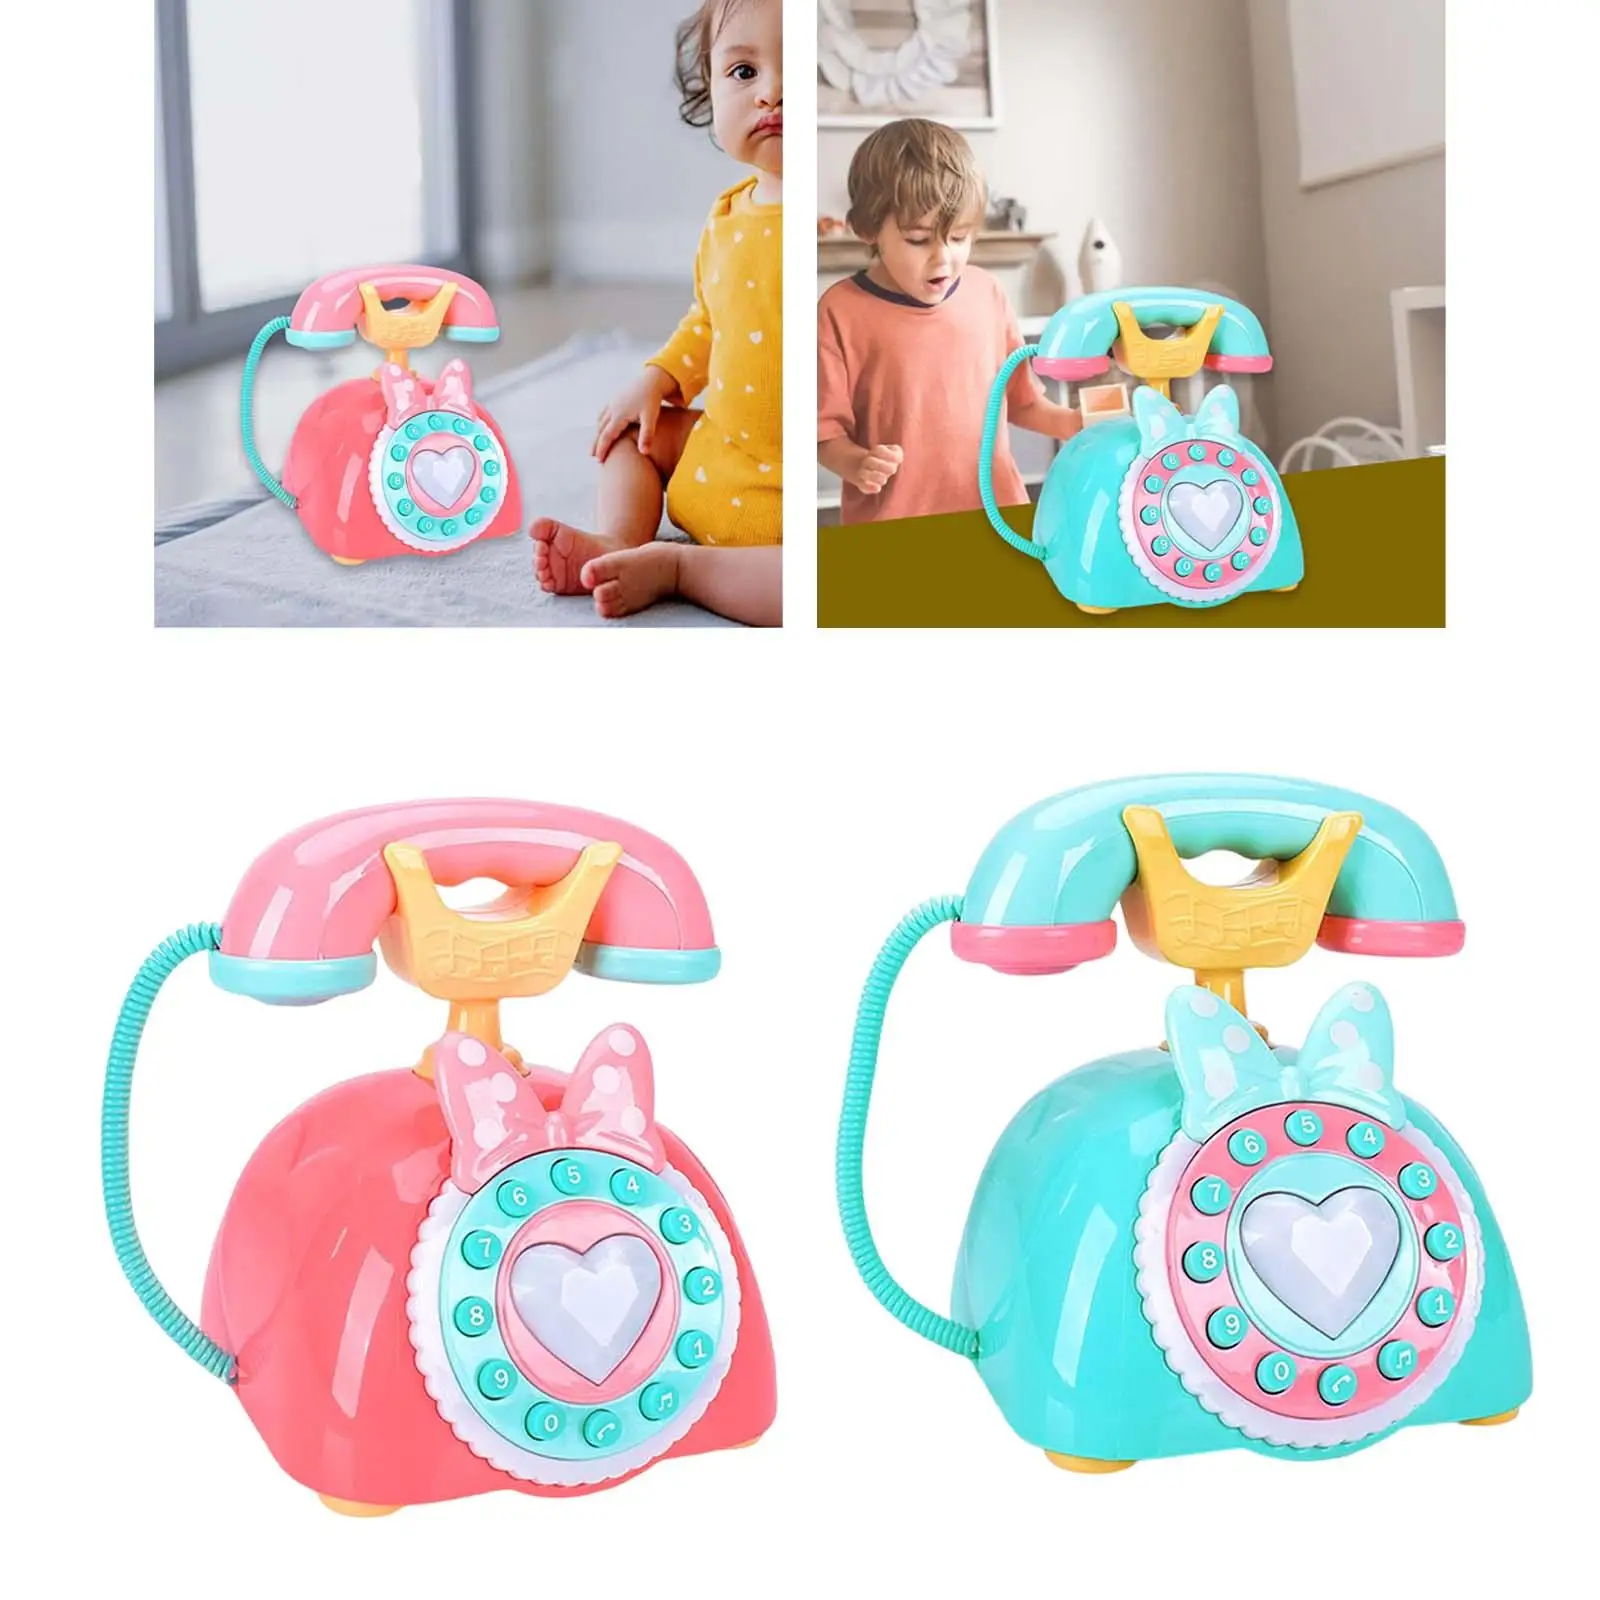 Telephone Toy Develop Chinese English Bilingual for Pretend Play Children 3+